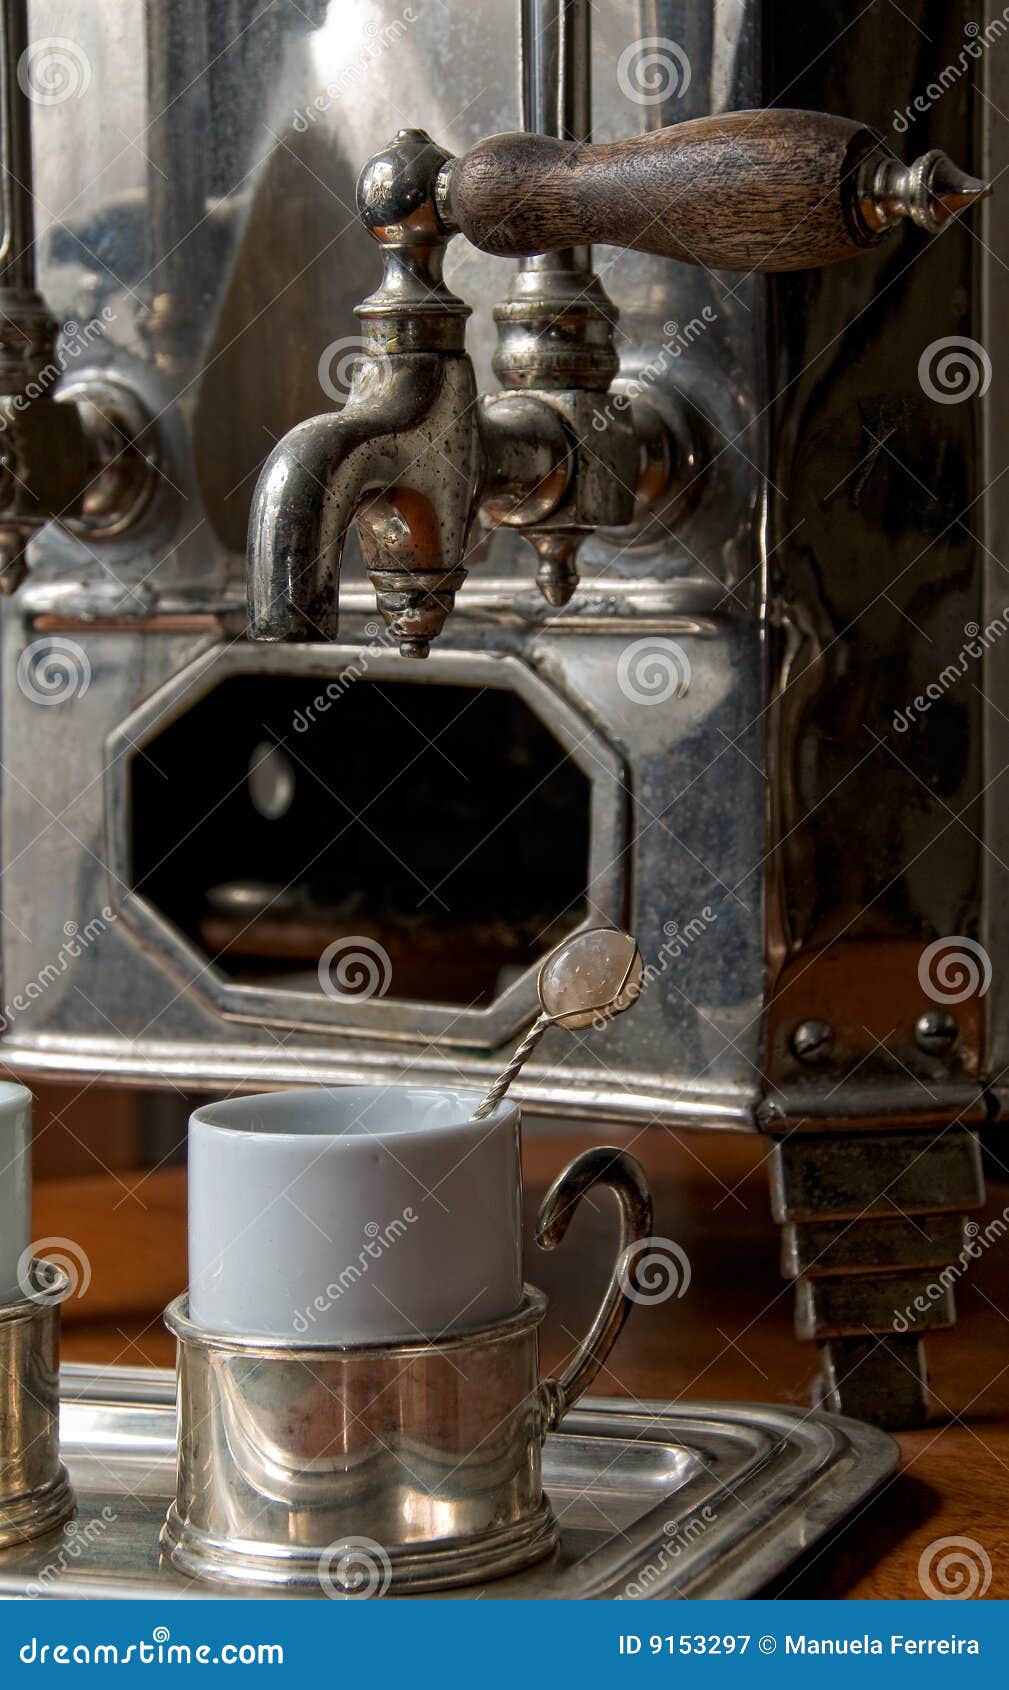 Old Coffee Maker In Vintage Style Isolated On White Stock Photo, Picture  and Royalty Free Image. Image 66113218.